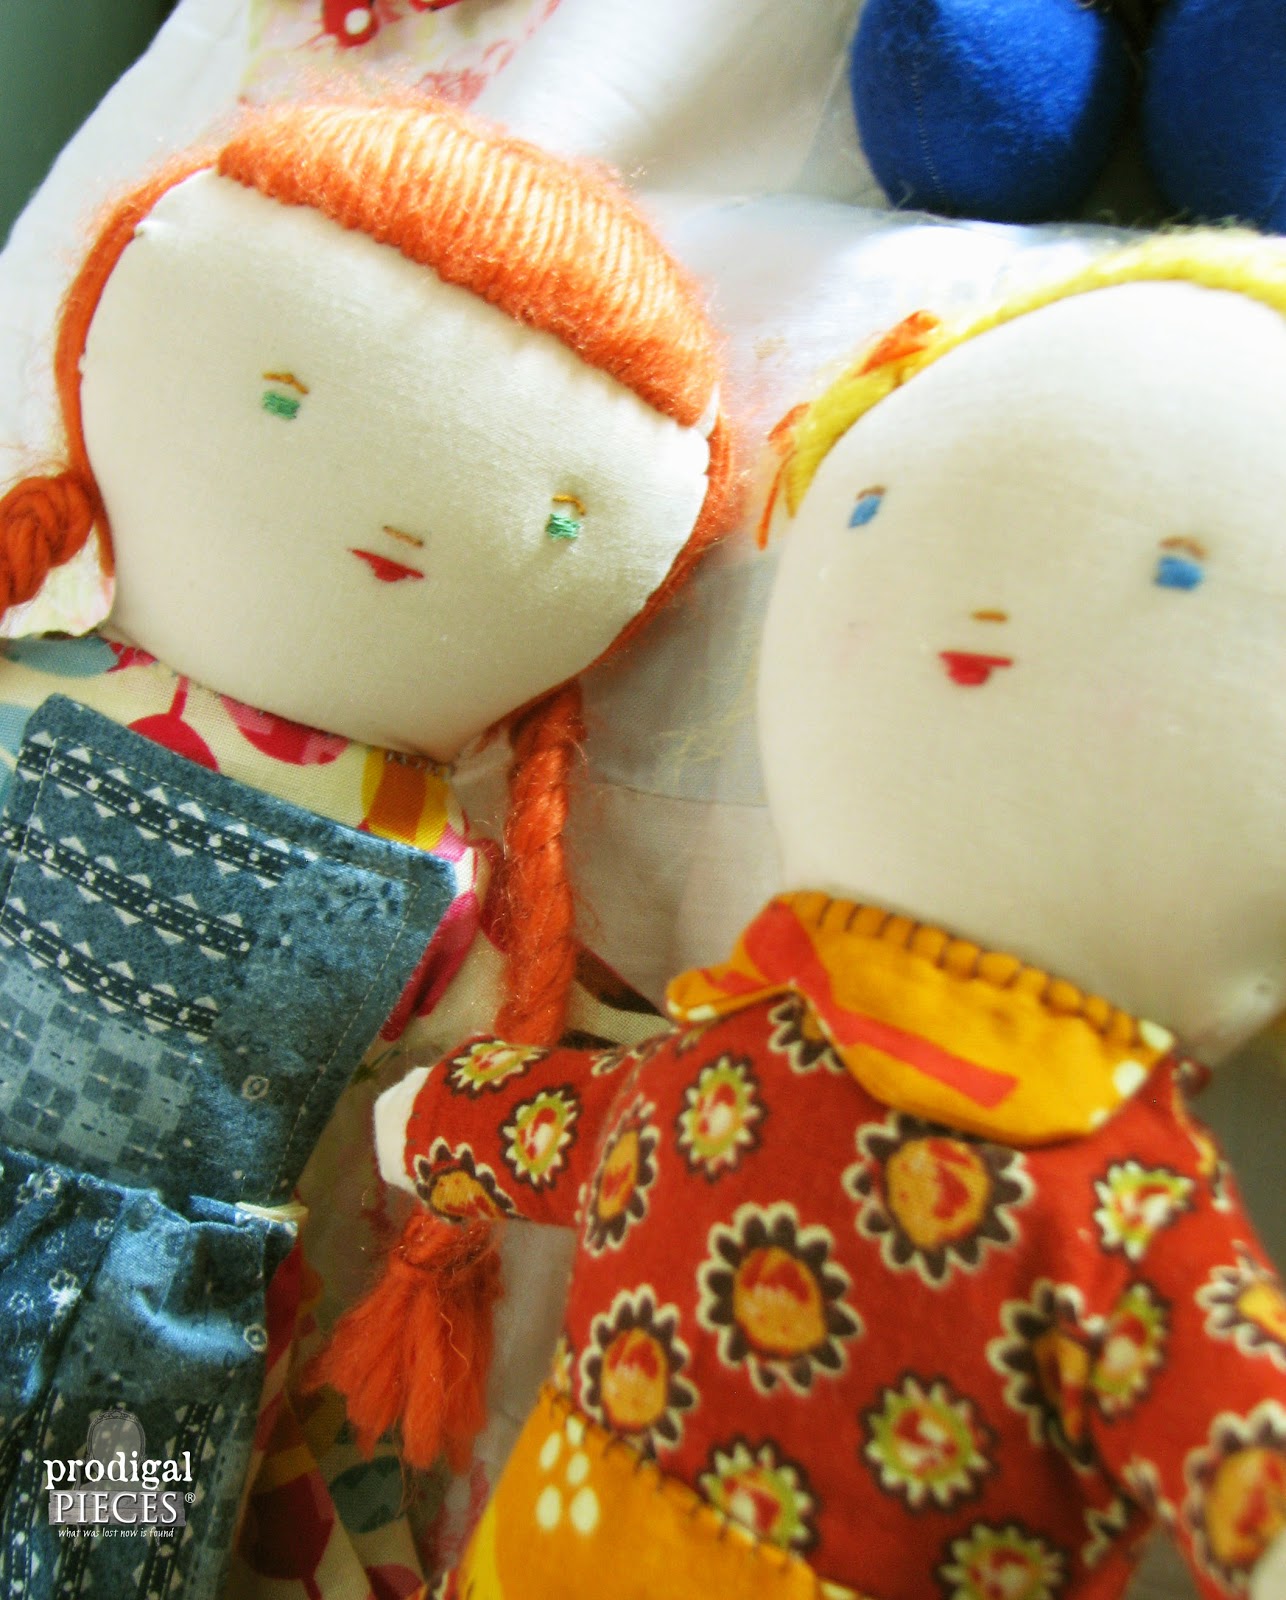 Hand-Embroidered Topsy Turvy Dolls by Prodigal Pieces | prodigalpieces.com